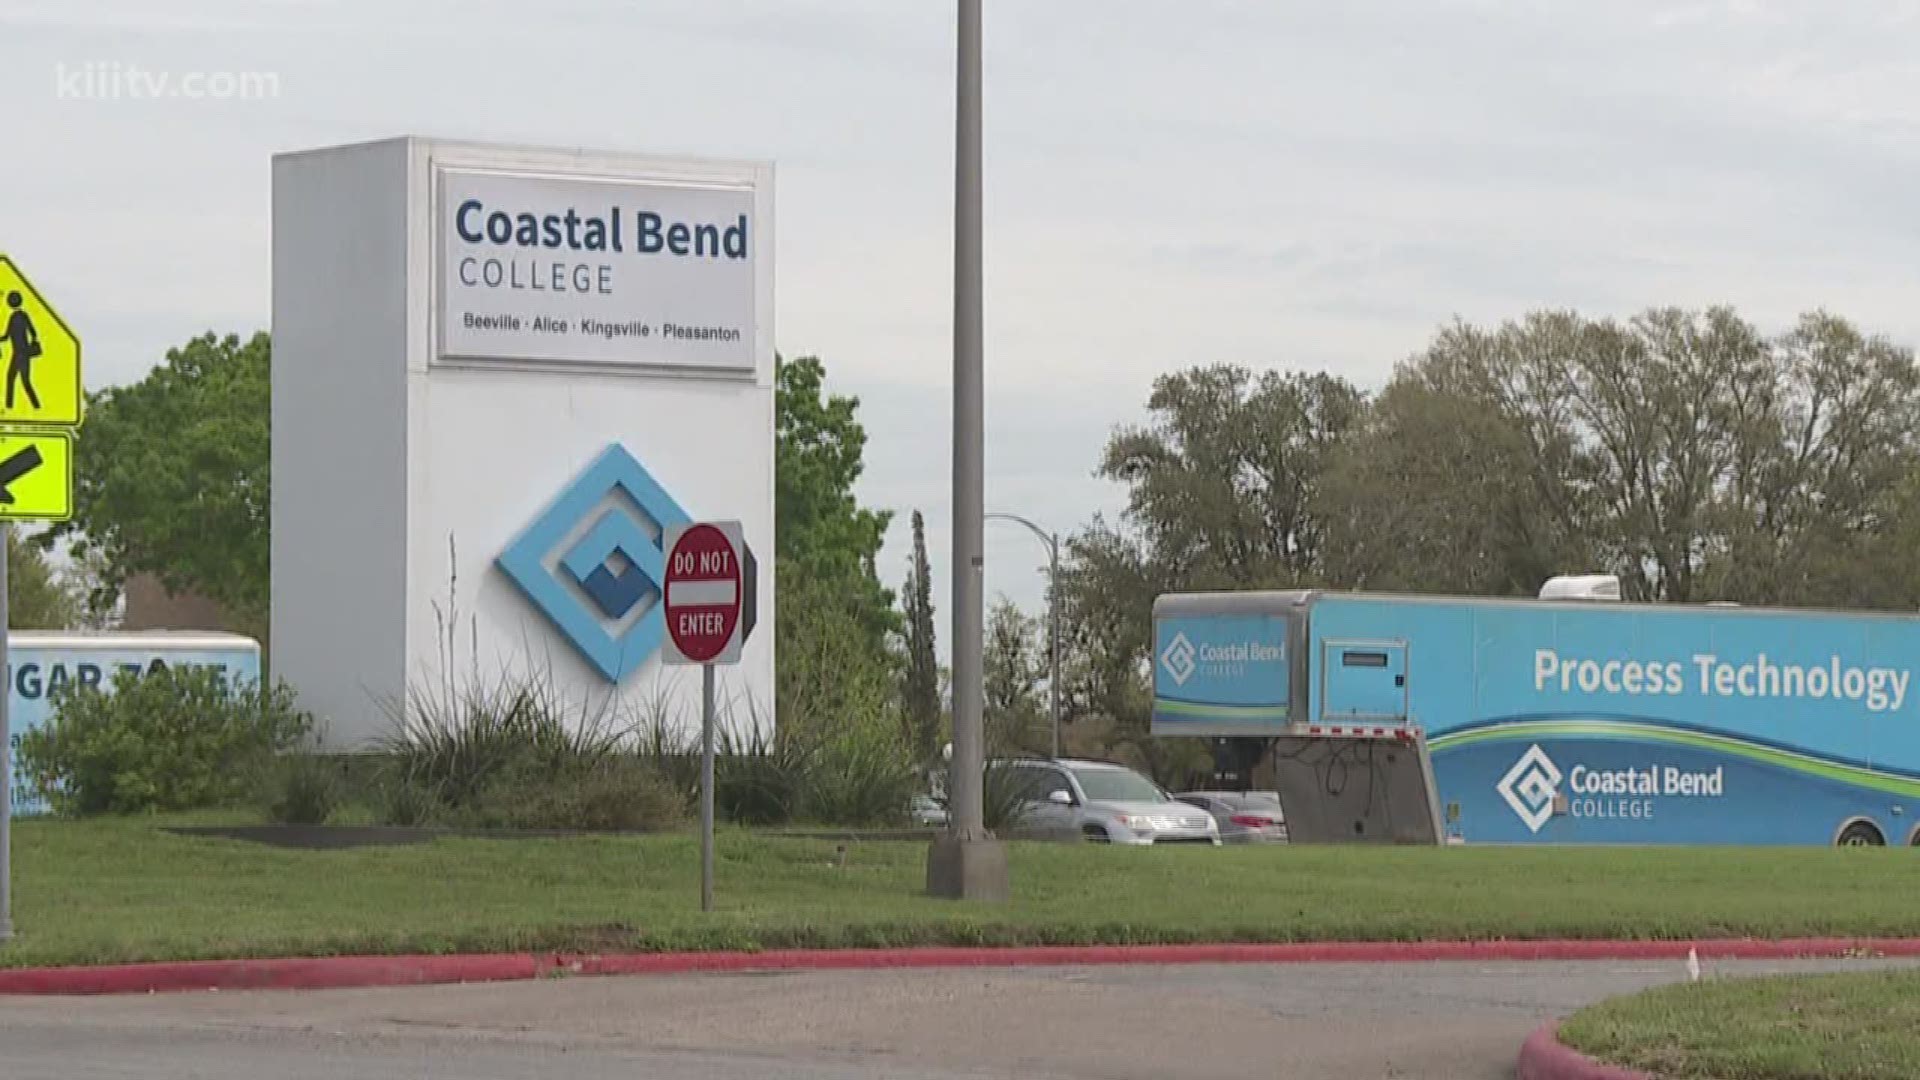 A community college in South Texas is currently being asked to repay thousands of dollars as punishment for misusing federal grant funds.